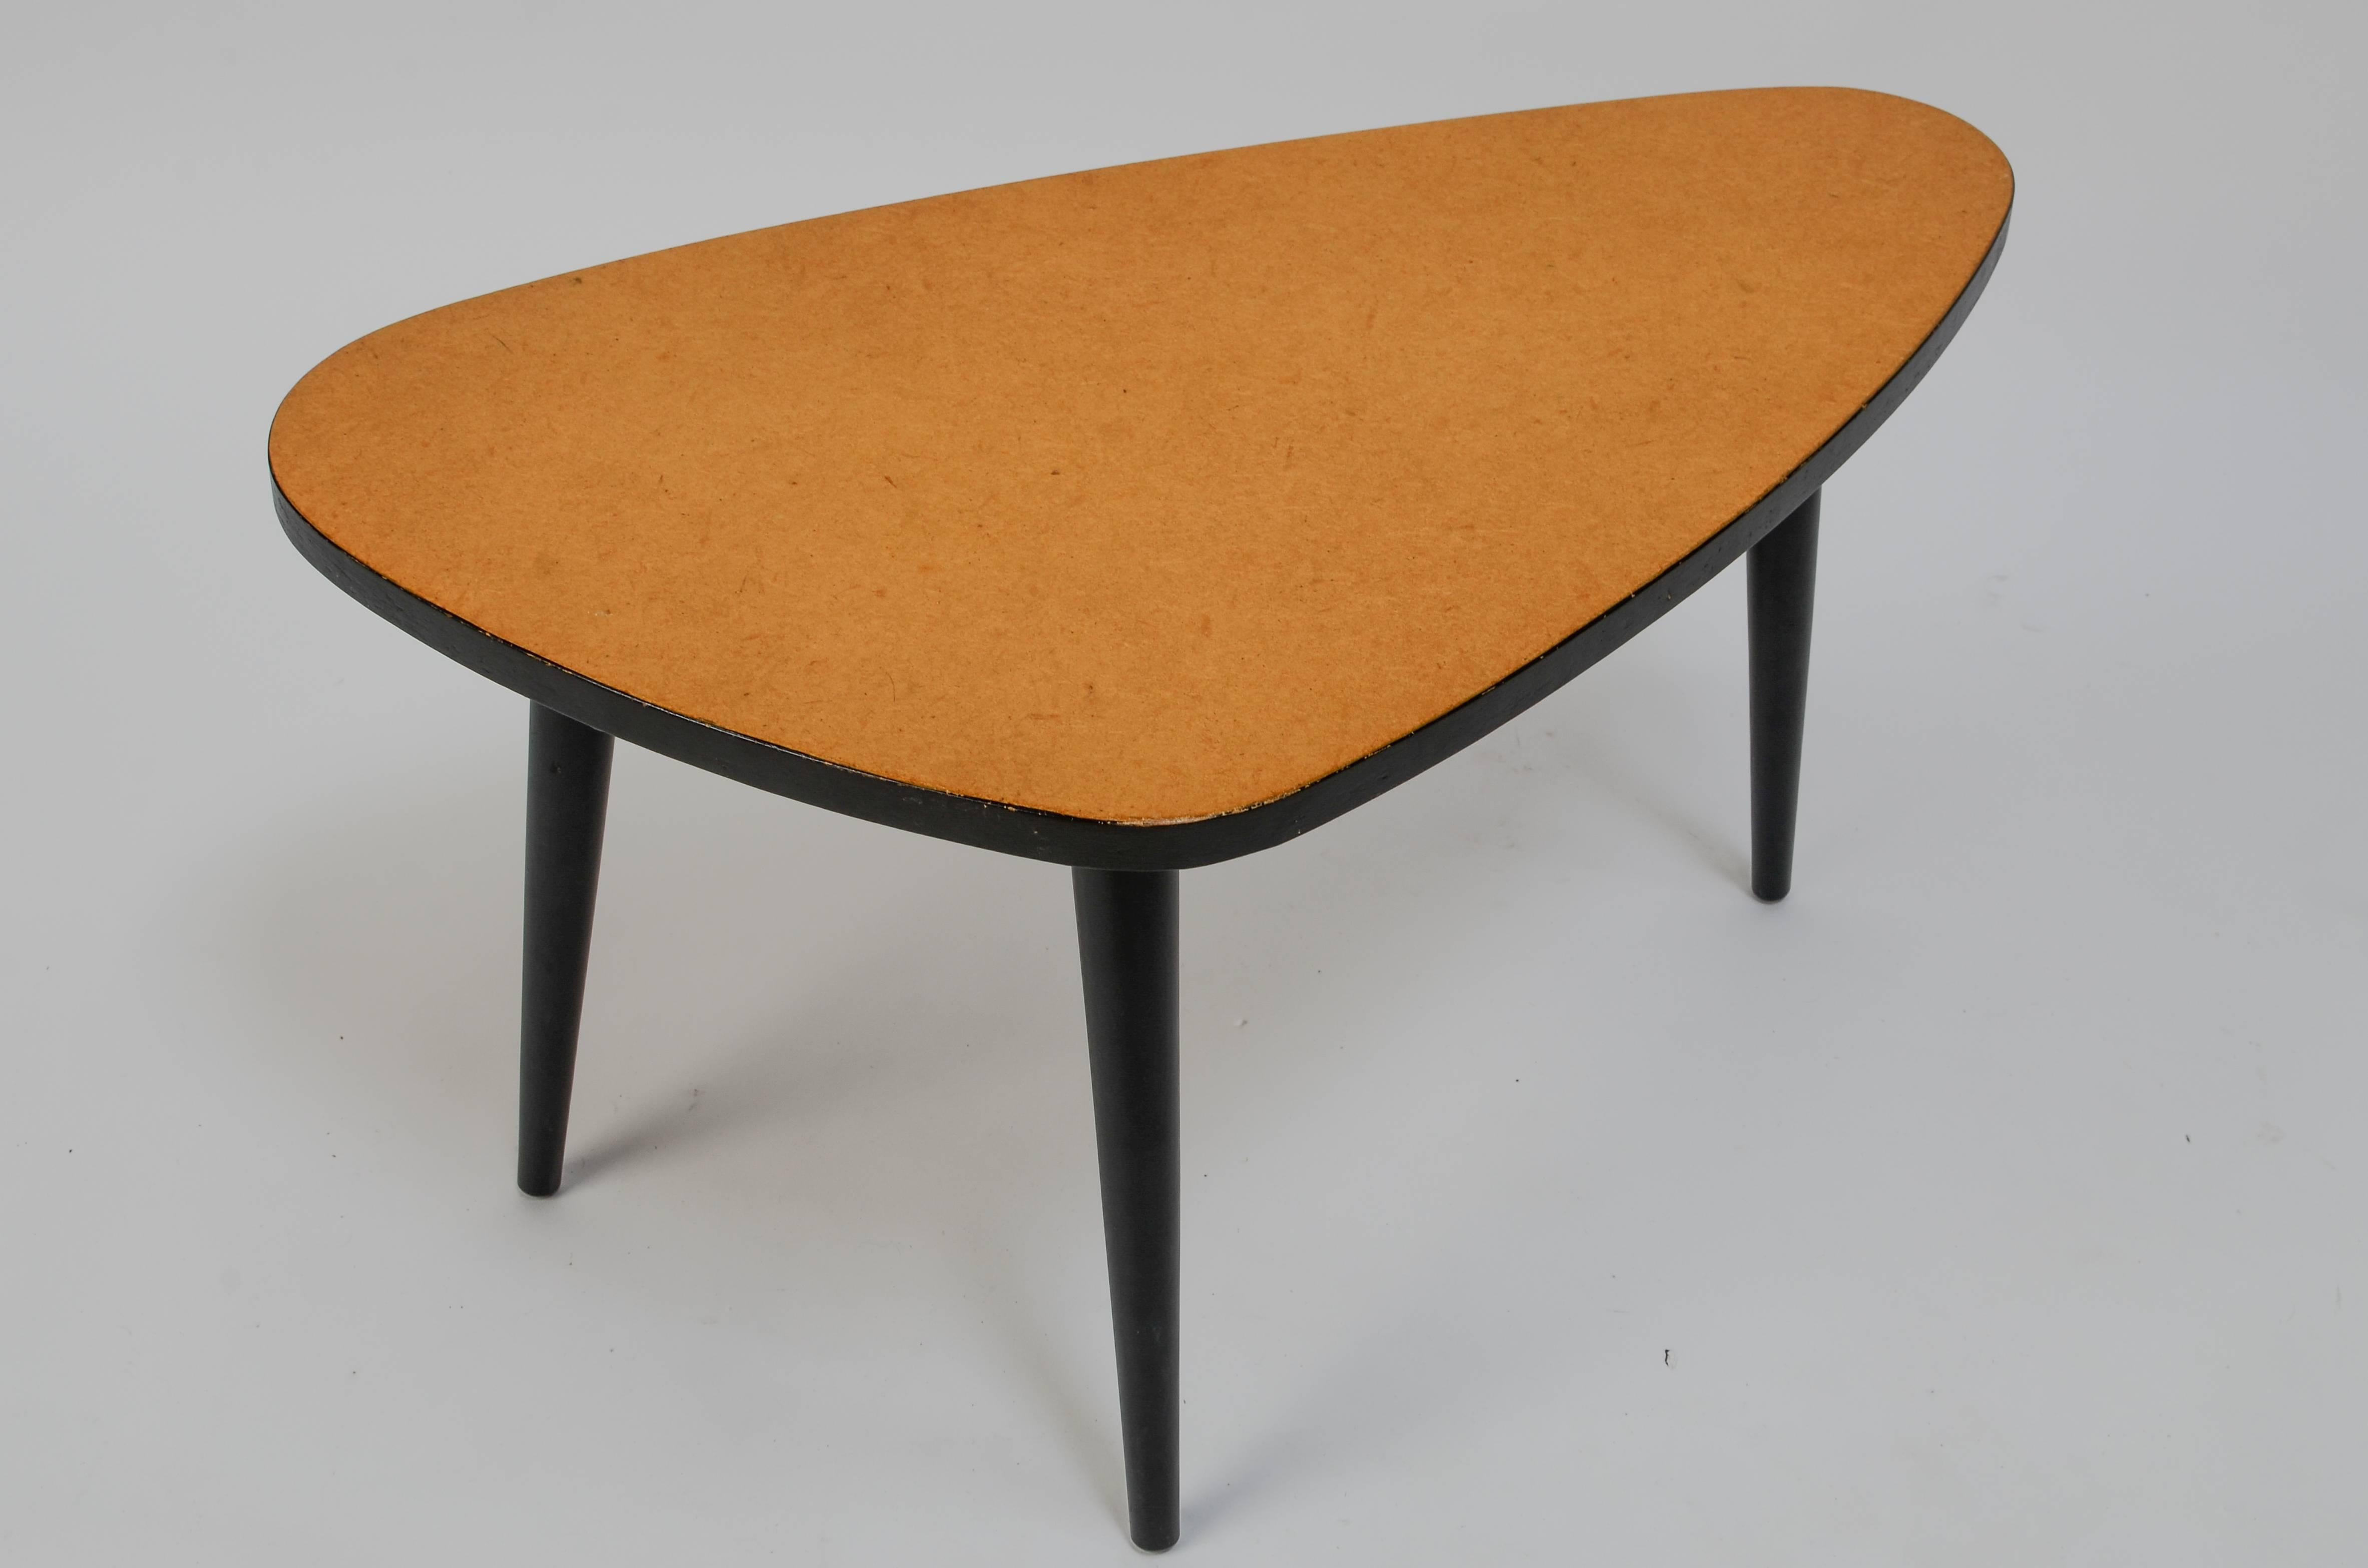 Japanese Lacquered Cork Side Table by Maruni, Japan, 1955 For Sale